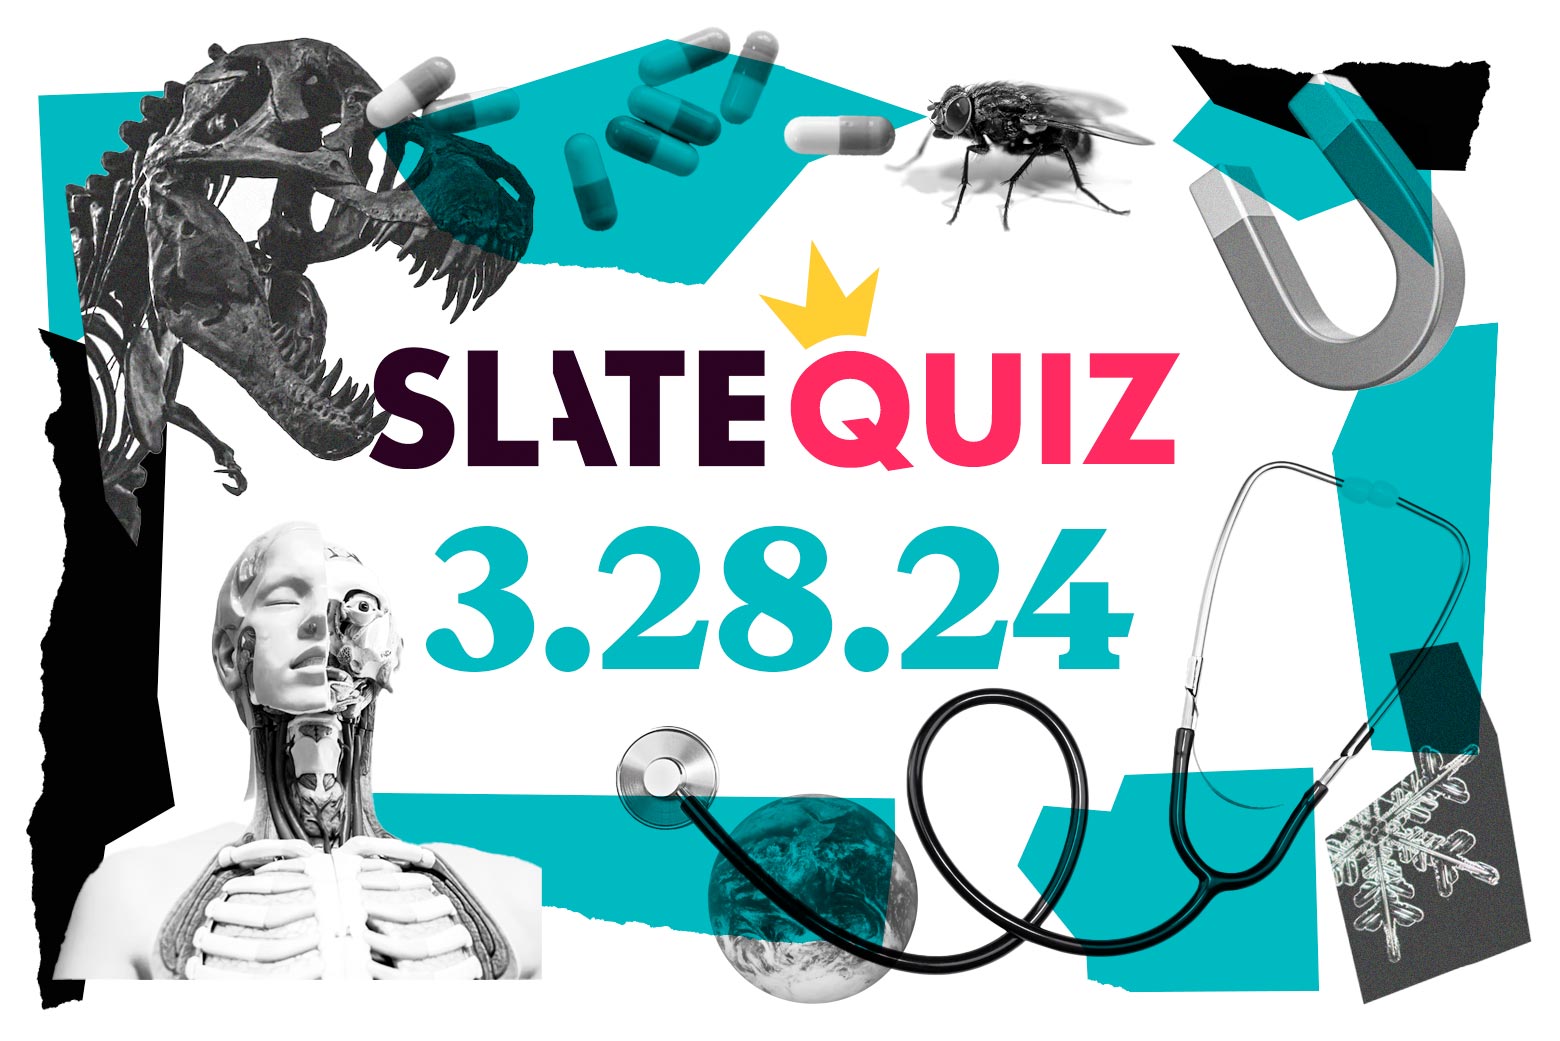 Ray Hamel’s Science-Themed Quiz Challenge: Are You Ready to Compete?